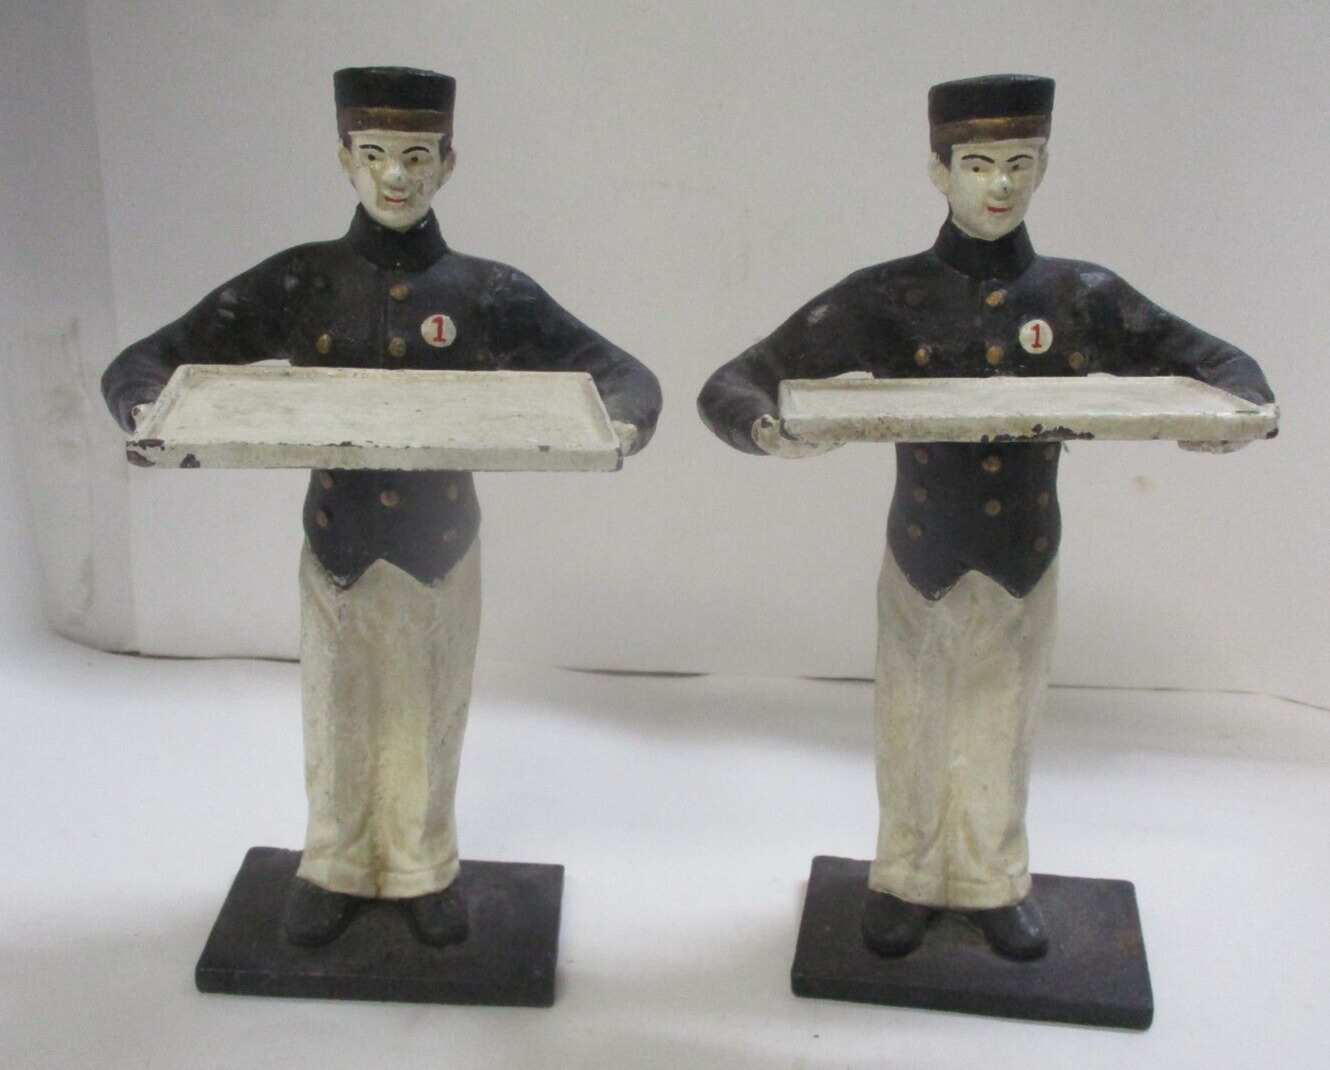 2 VINTAGE/REPRODUCTION CAST IRON WAITER BELLHOP BELL BOY CARD HOLDERS FIGURINES